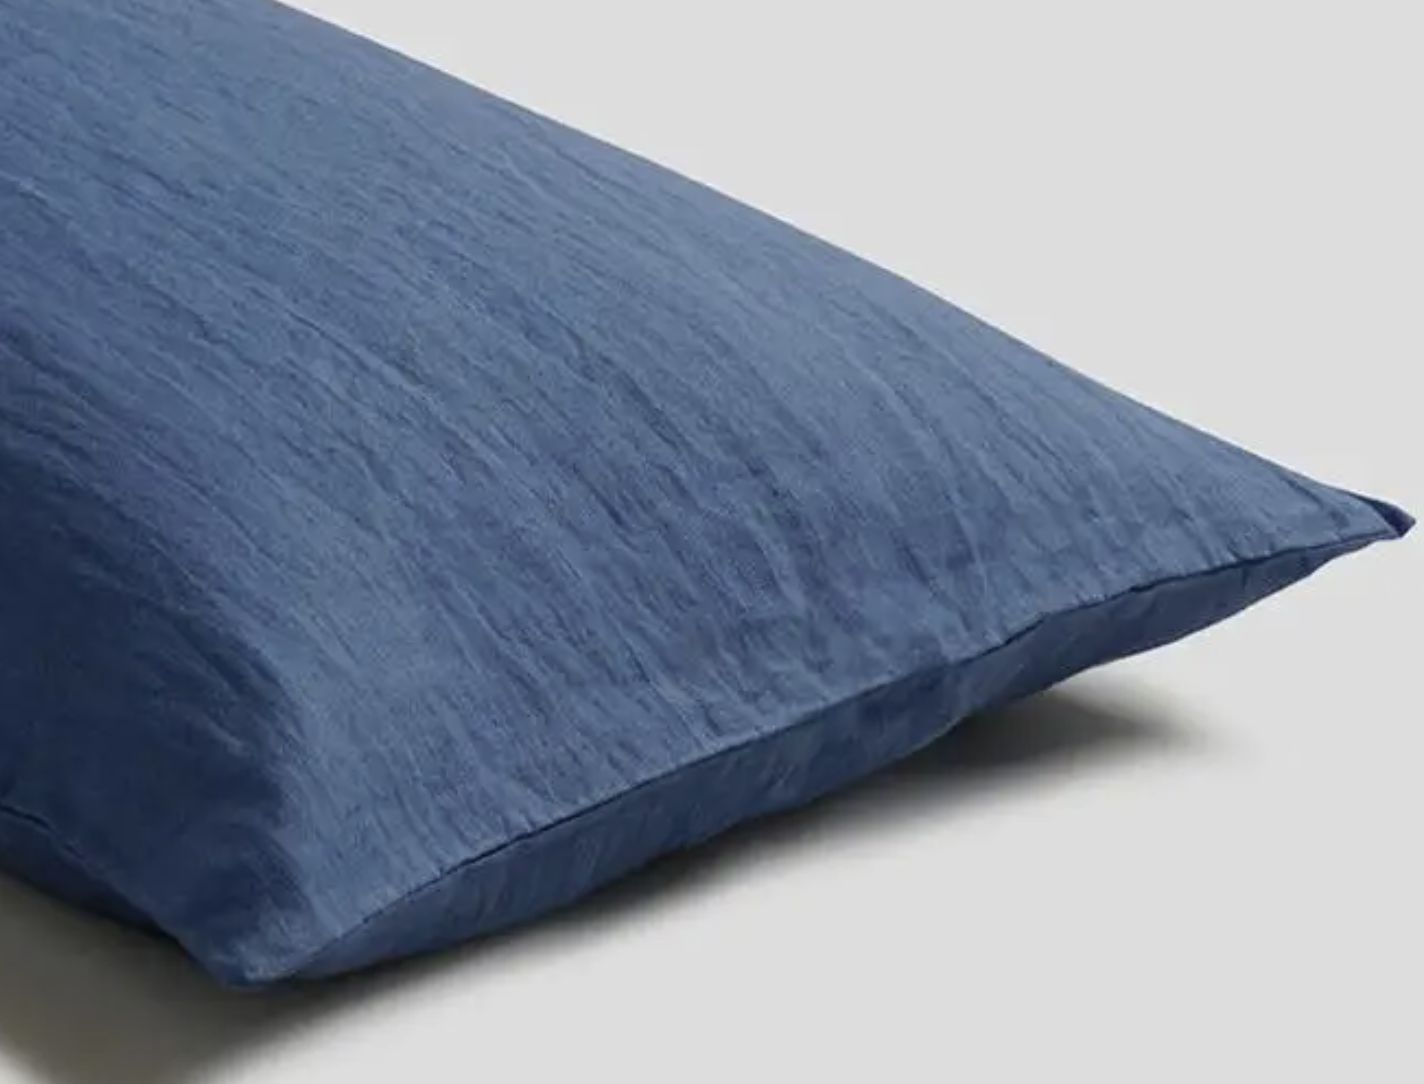 French Flax / Linen Pillowcase (pair): Blueberry, Size: King